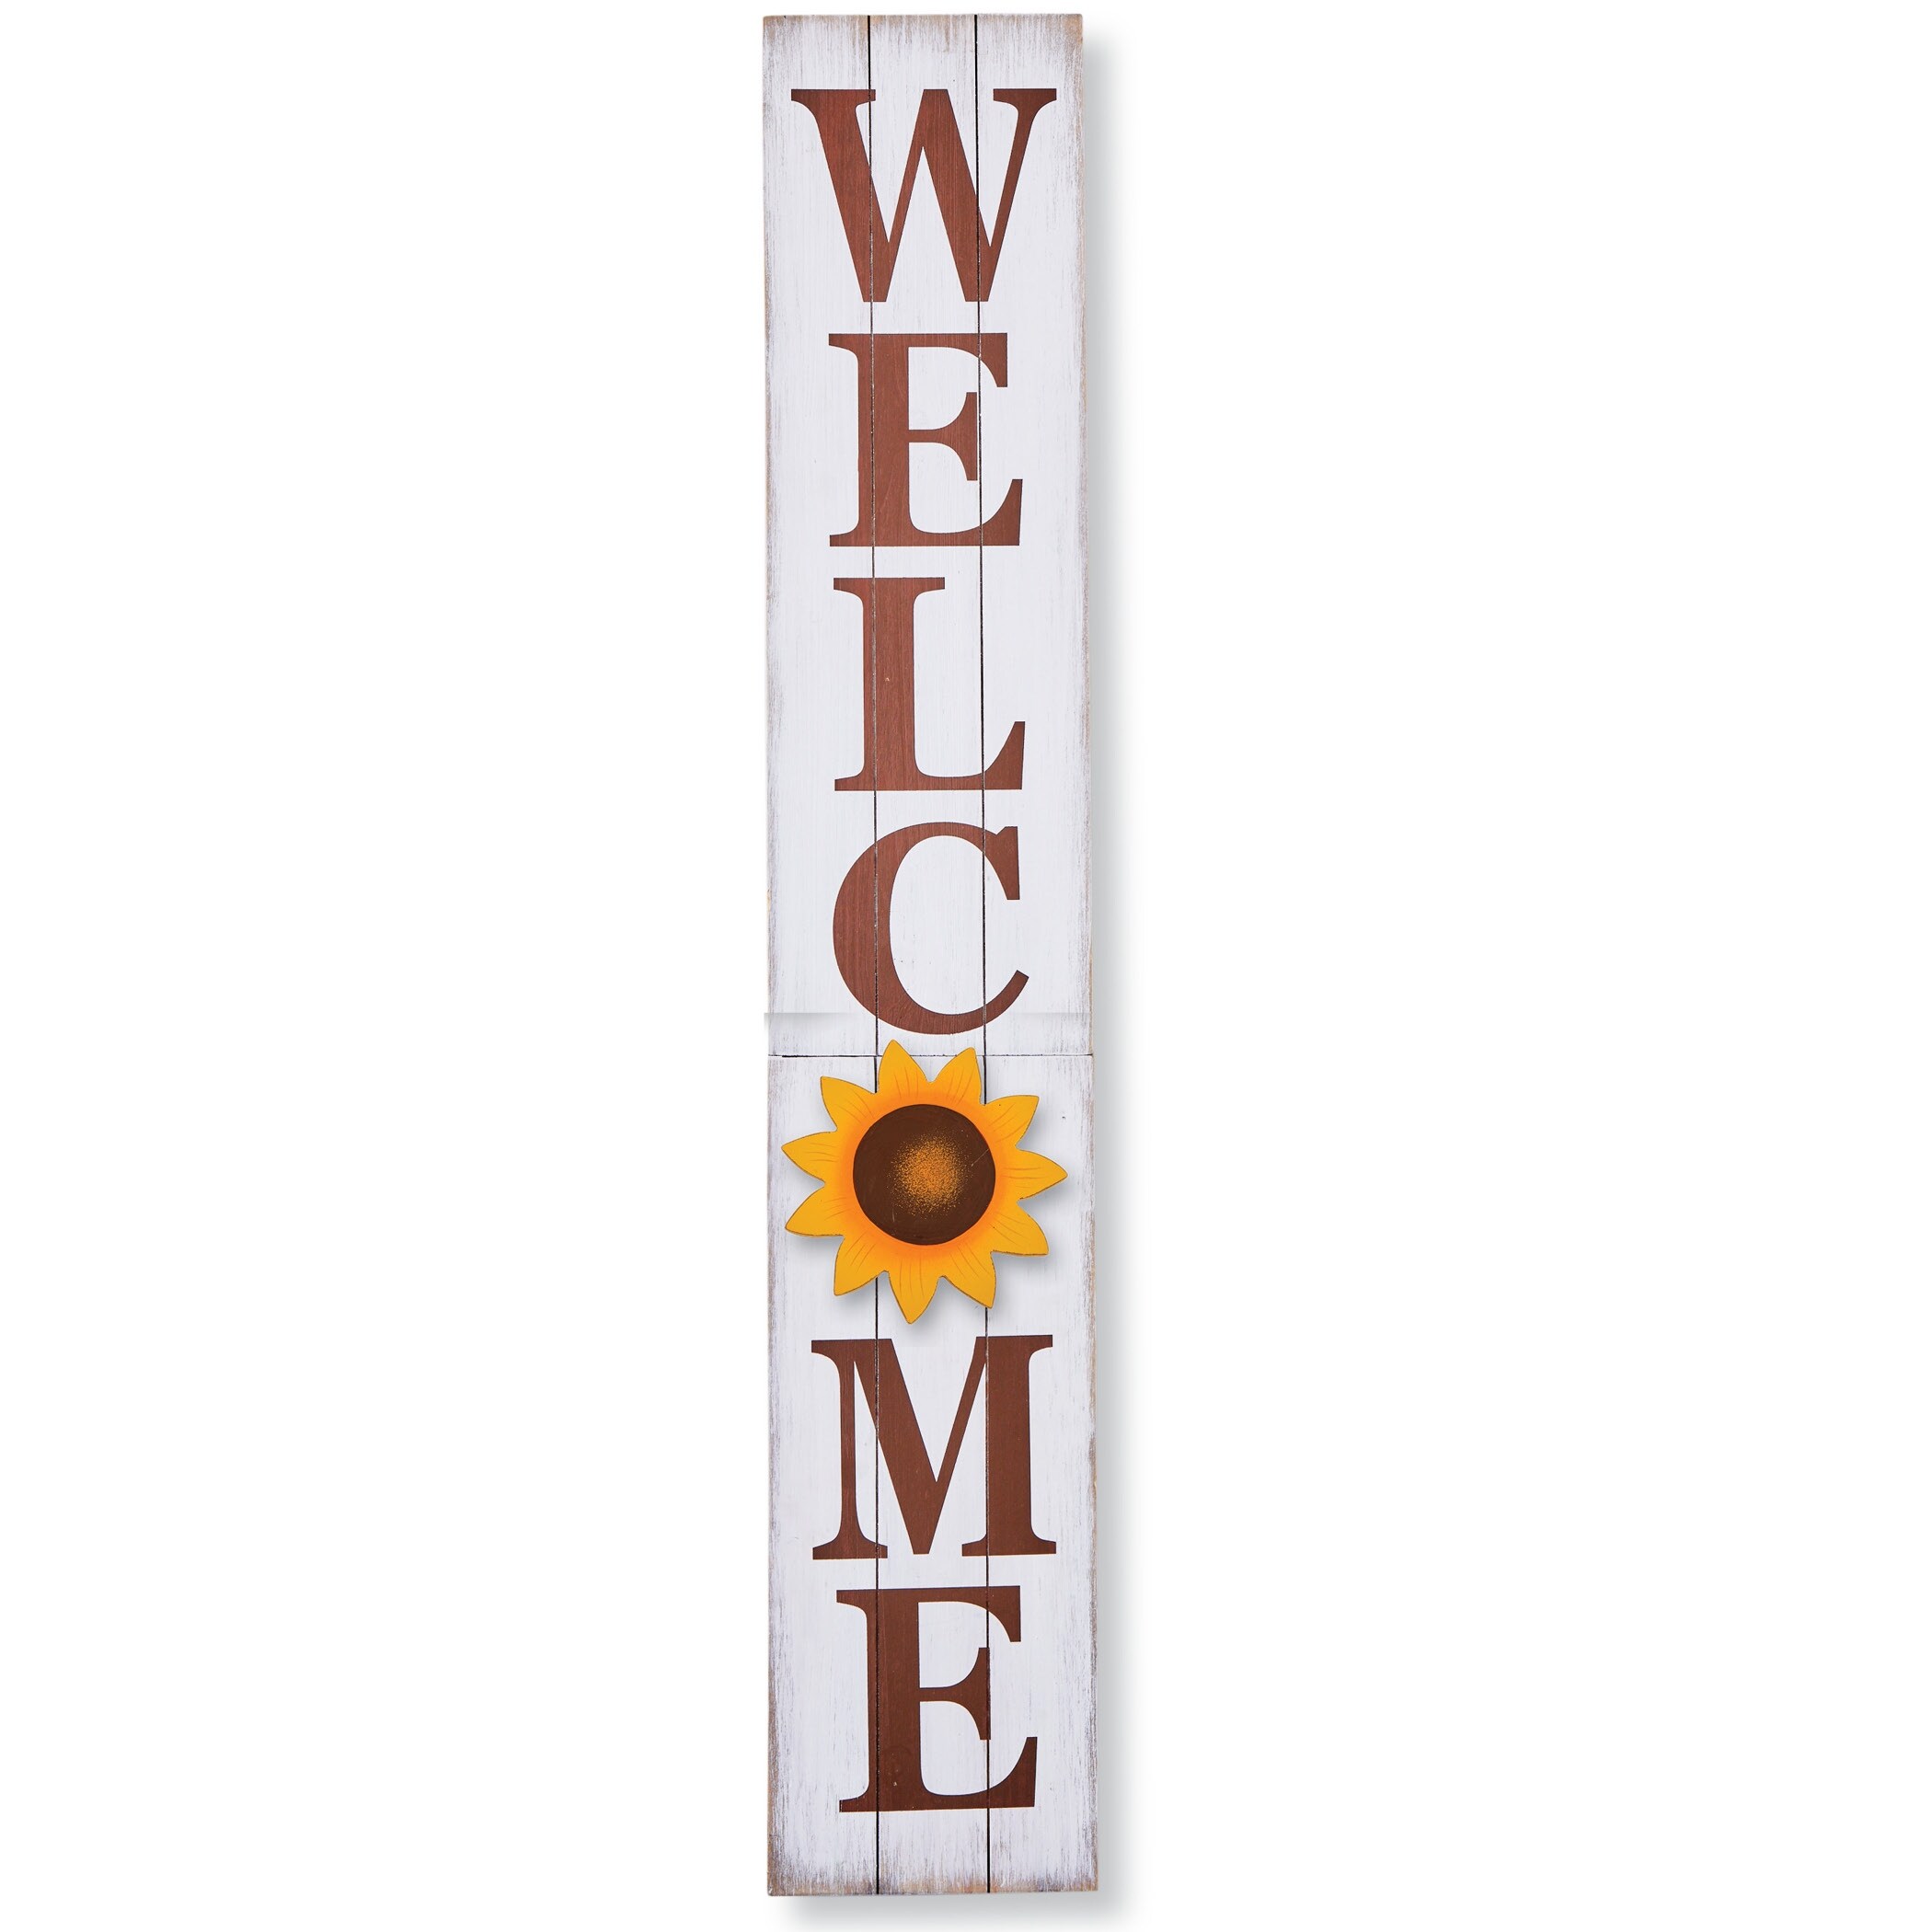 8-Piece Seasonal Outdoor Porch Welcome Sign - White